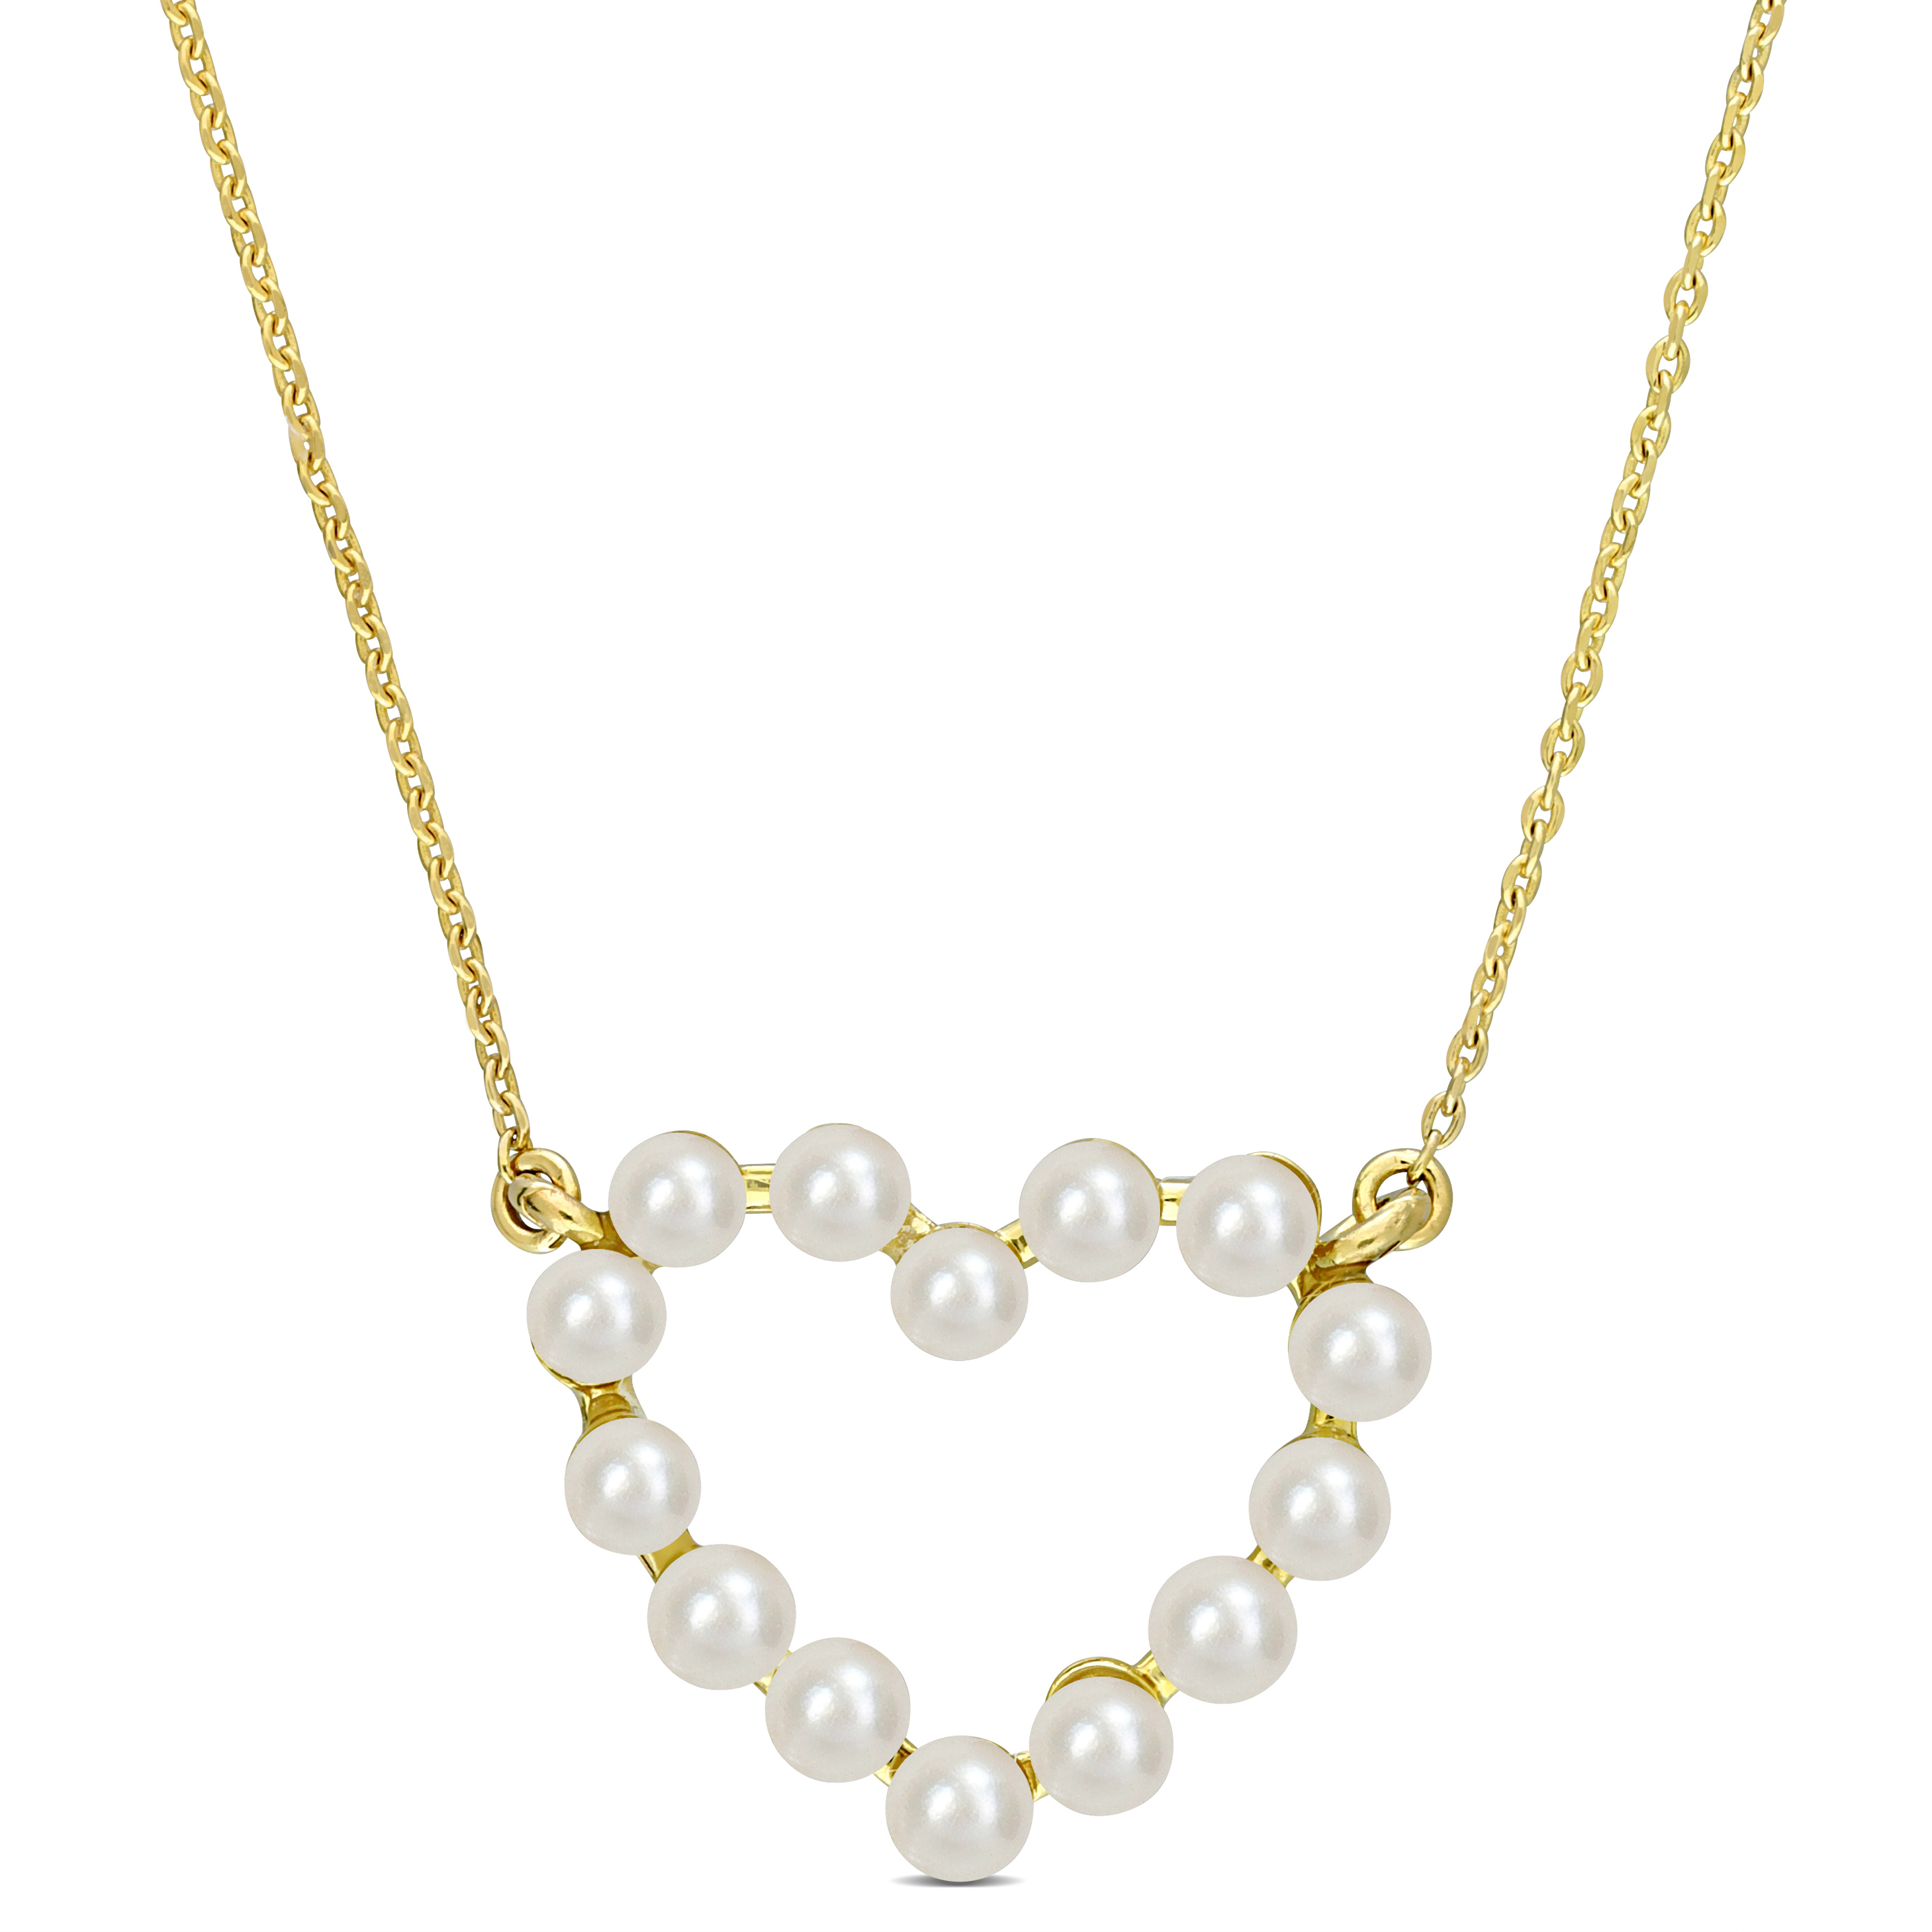 2-2.5 MM Cultured Freshwater Pearl Heart Pendant With Chain in 14k Yellow Gold